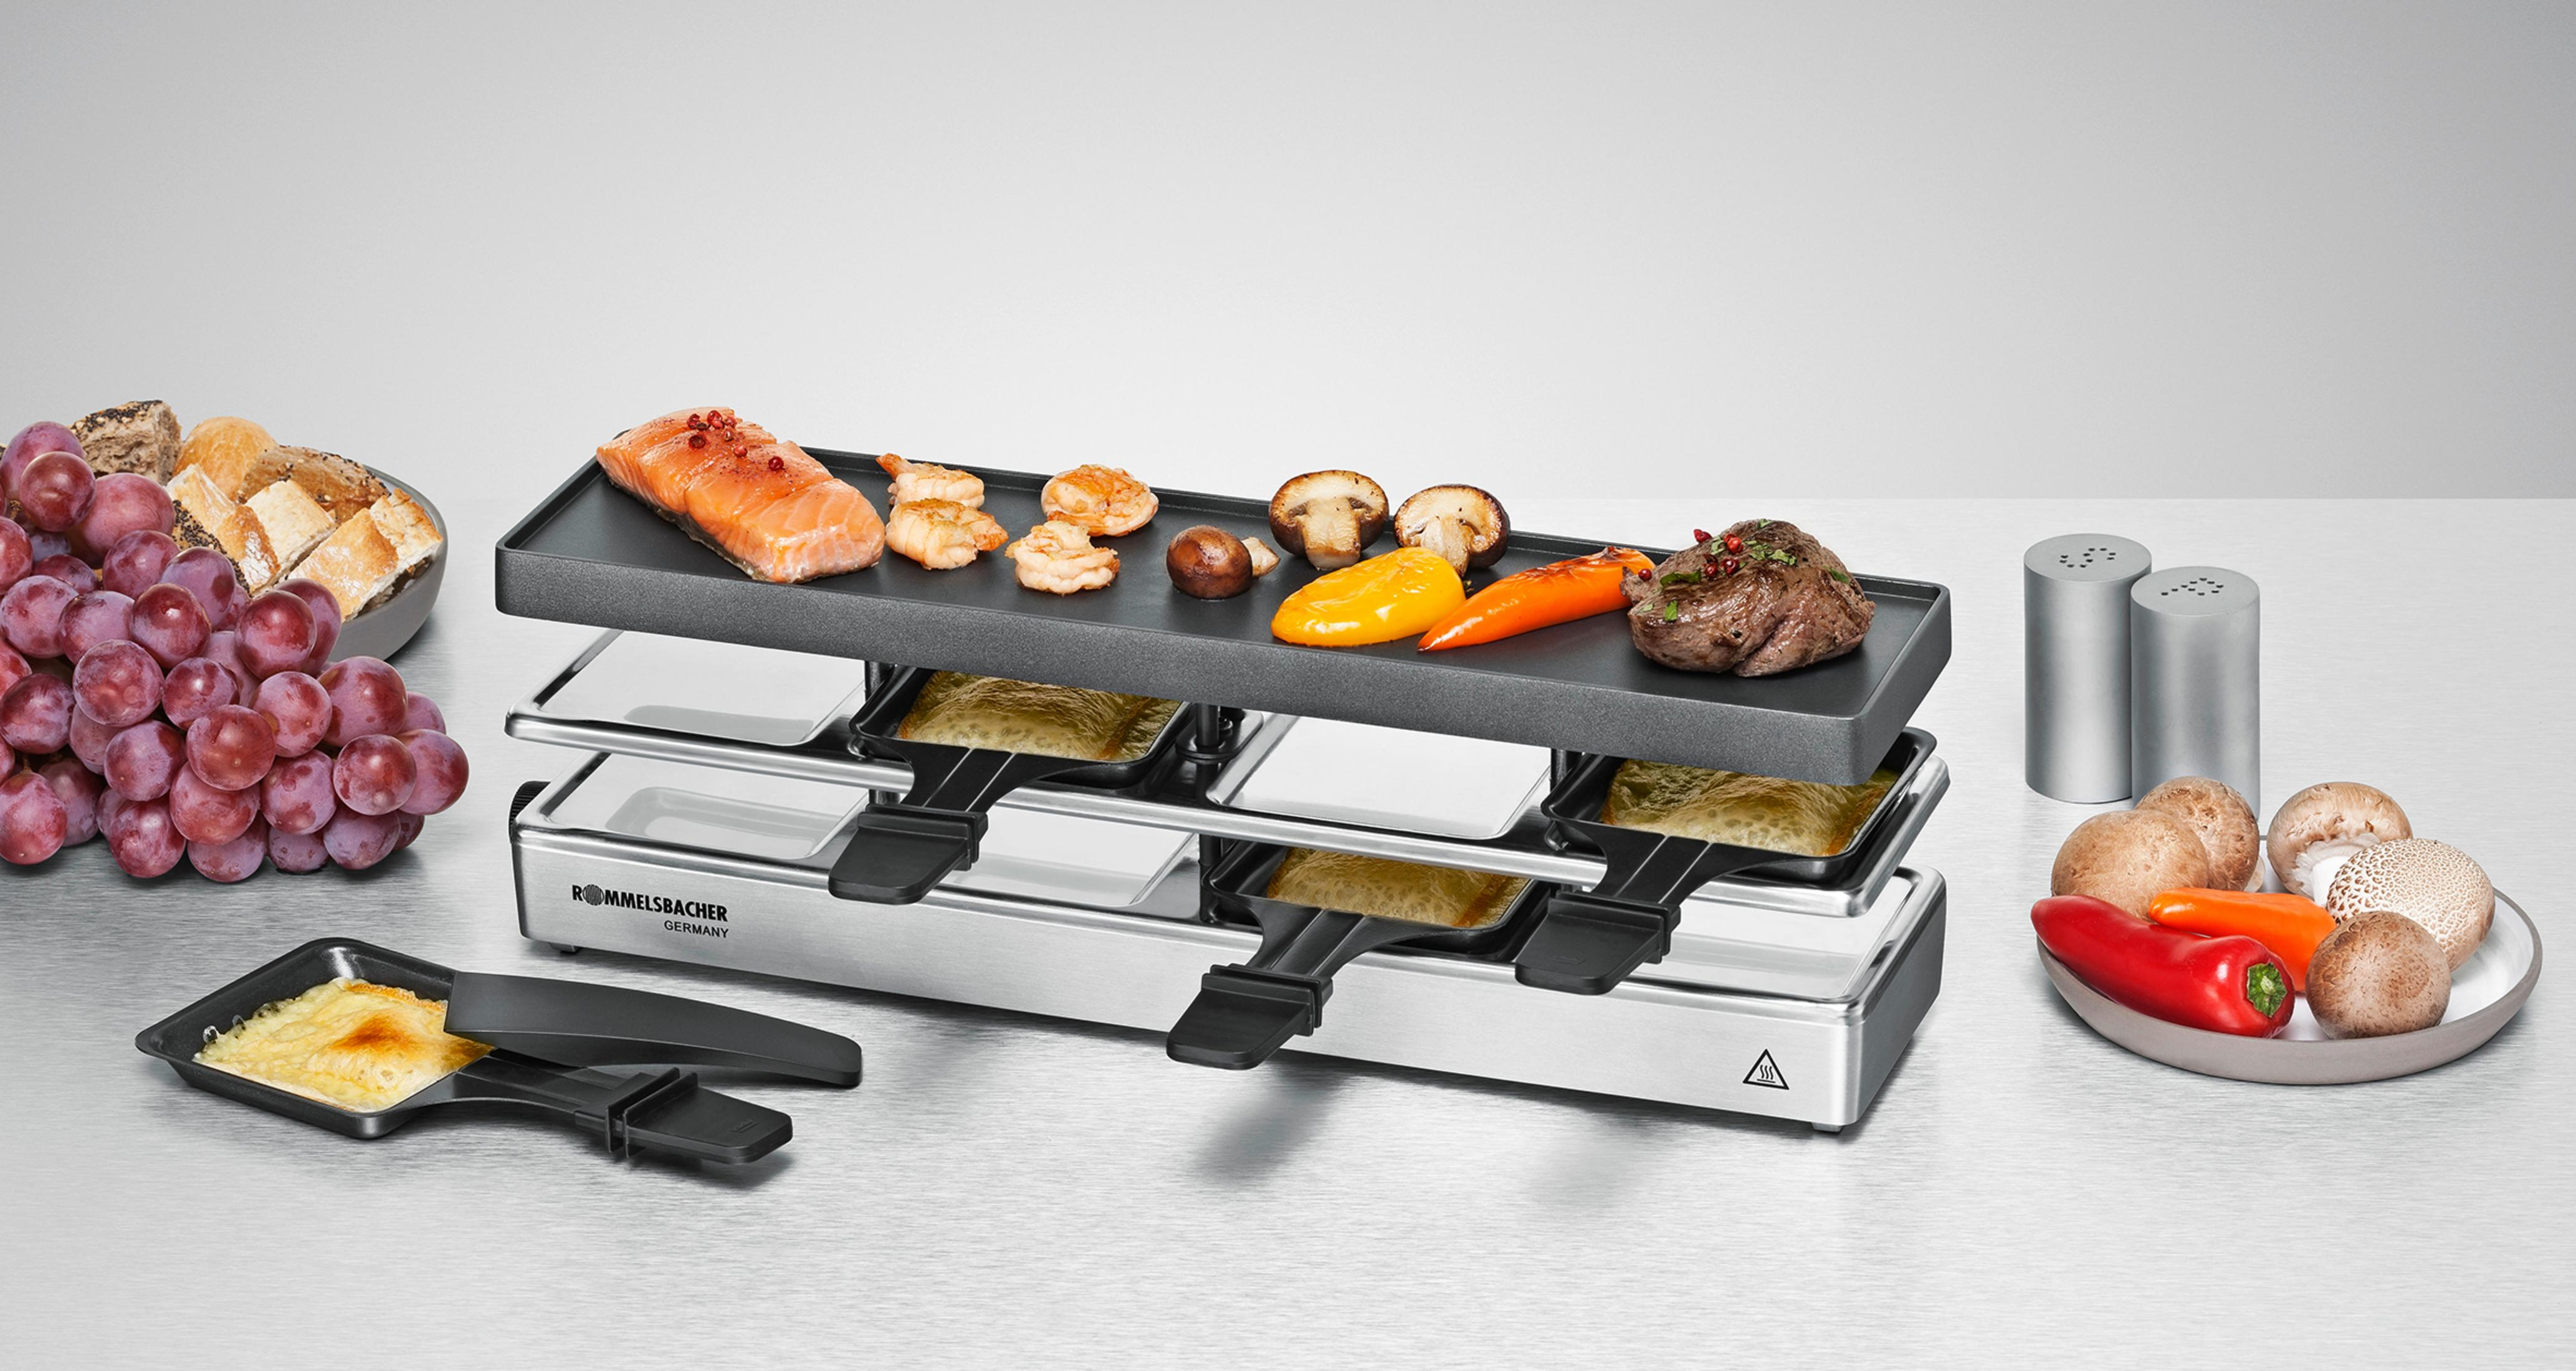 FUN 800 Raclette 4 ROMMELSBACHER FOR RC